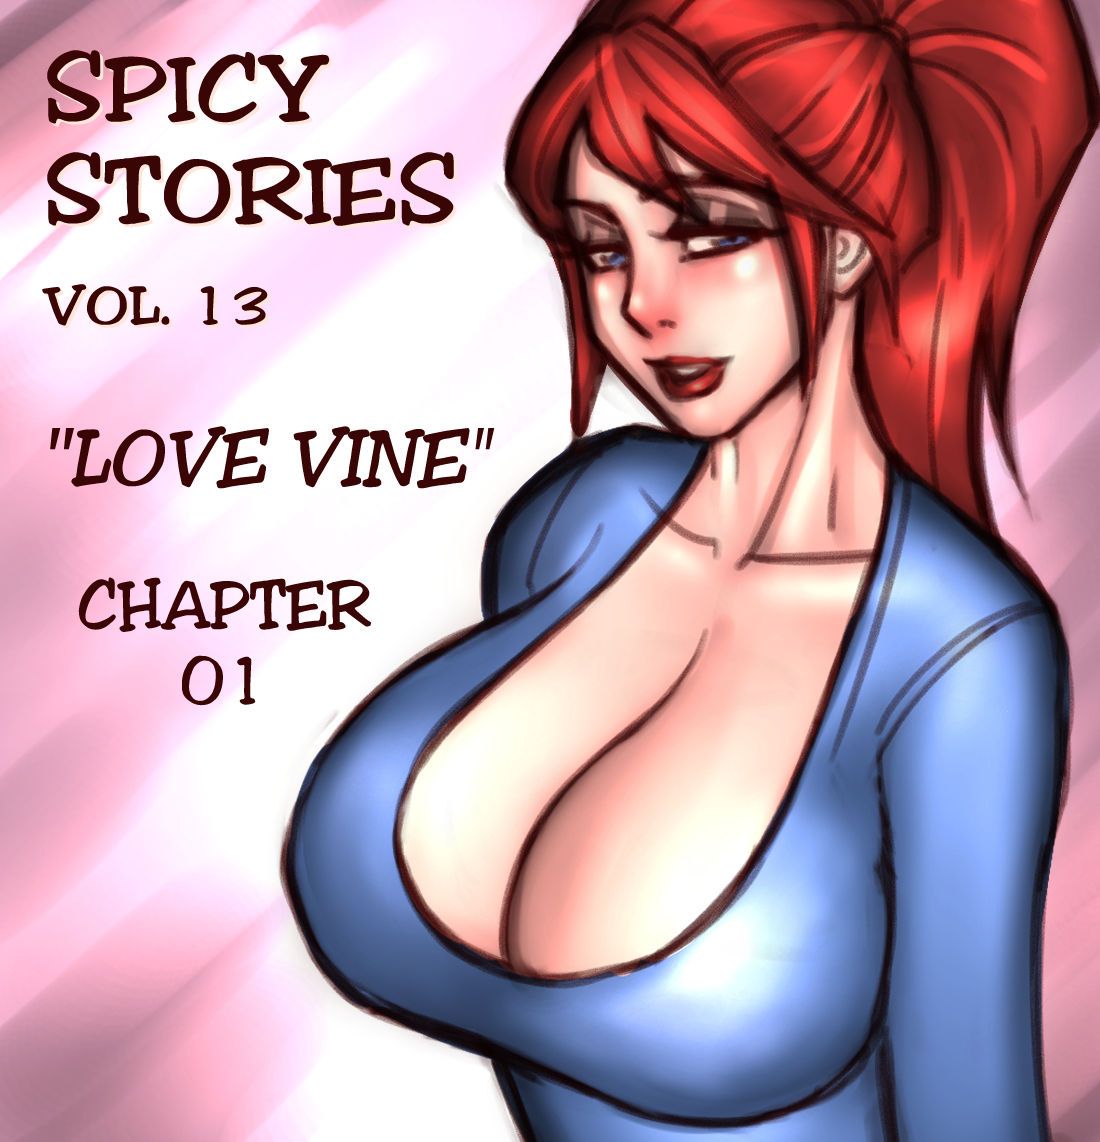 NGT Spicy Stories 13 - Love Vine (Ongoing) NGT Spicy Stories 13 - Love Vine (Ongoing) 31